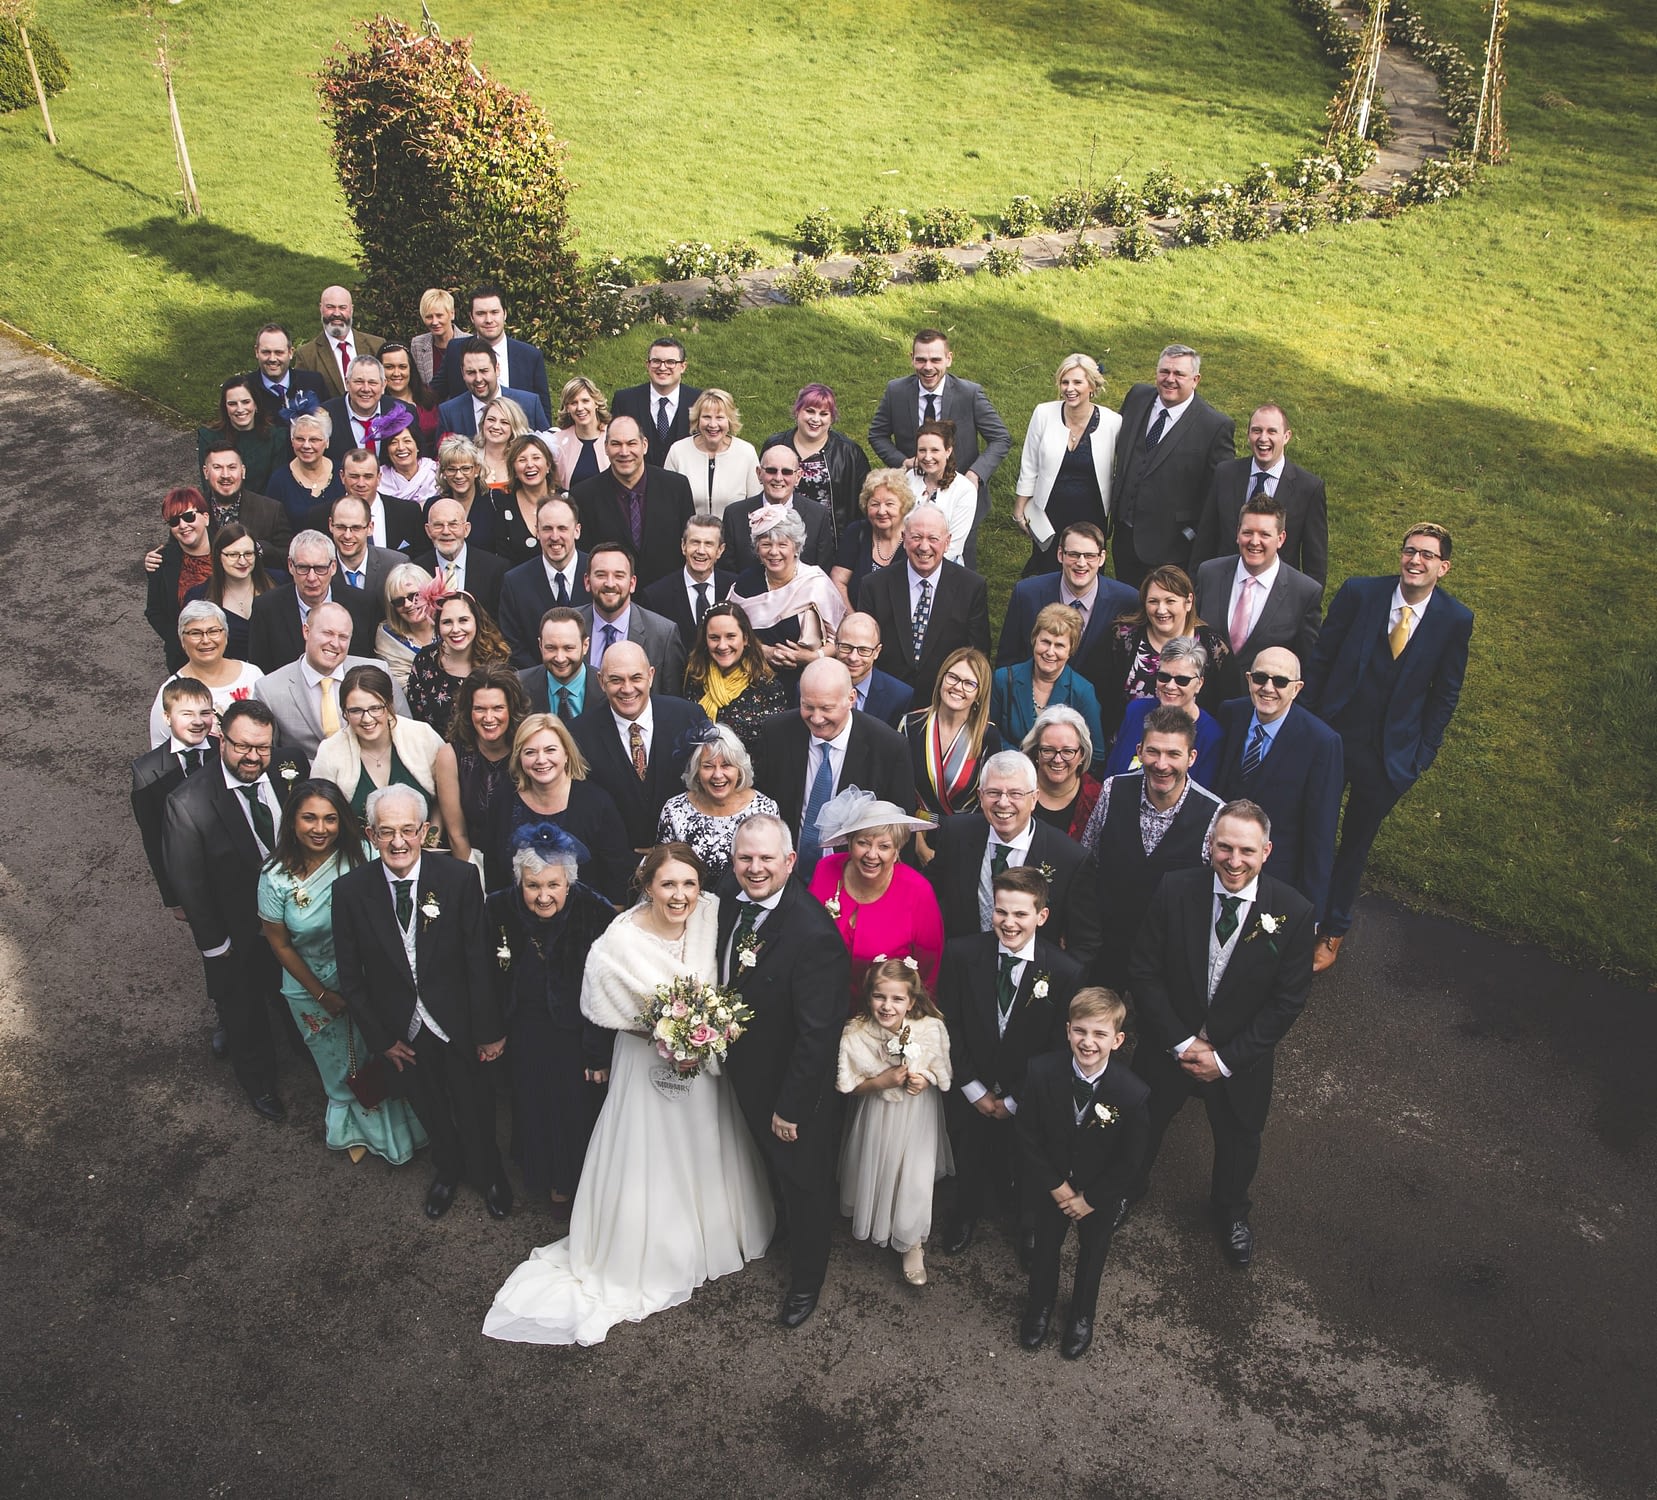 group photograph of wedding guests